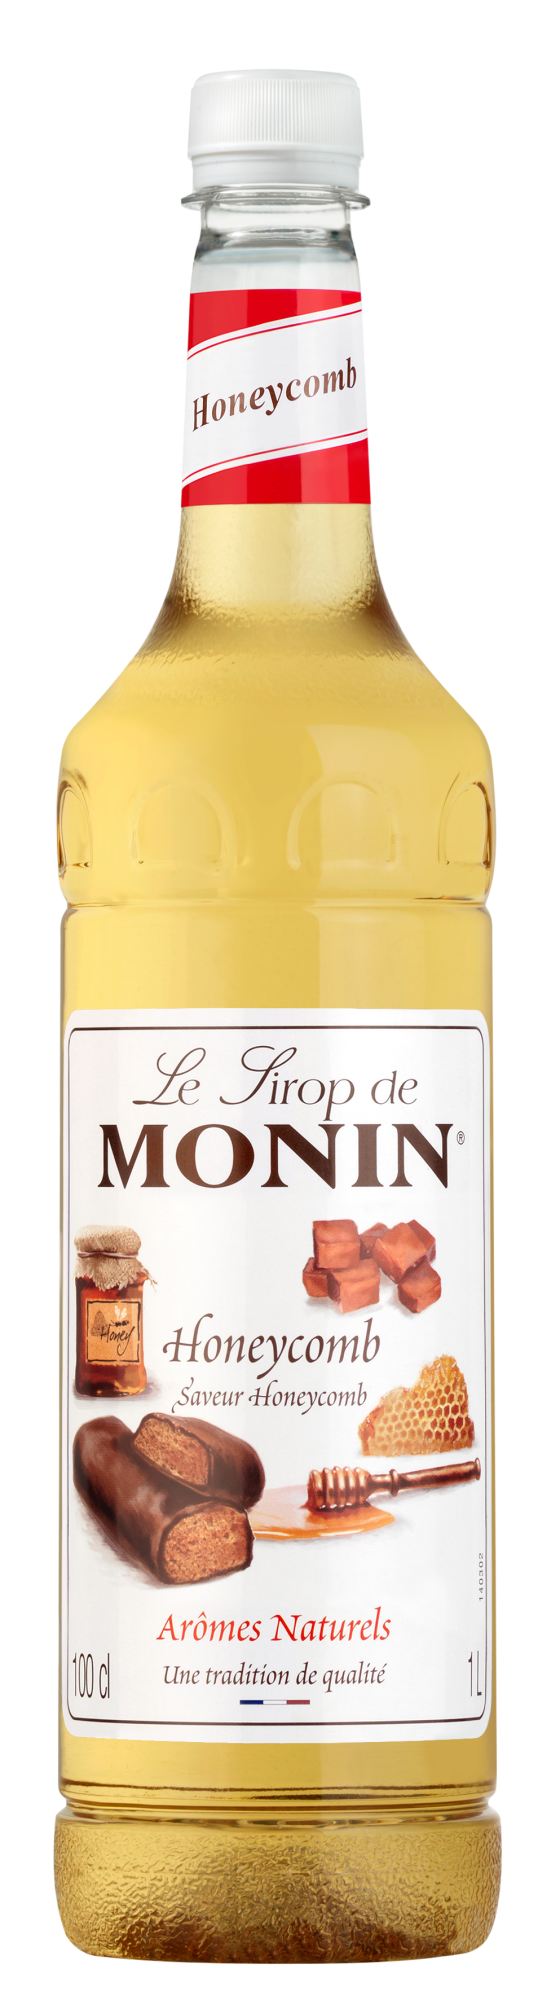 Buy MONIN Honeycomb Syrup. It has a rich, luxurious flavour of honeycomb toffee.